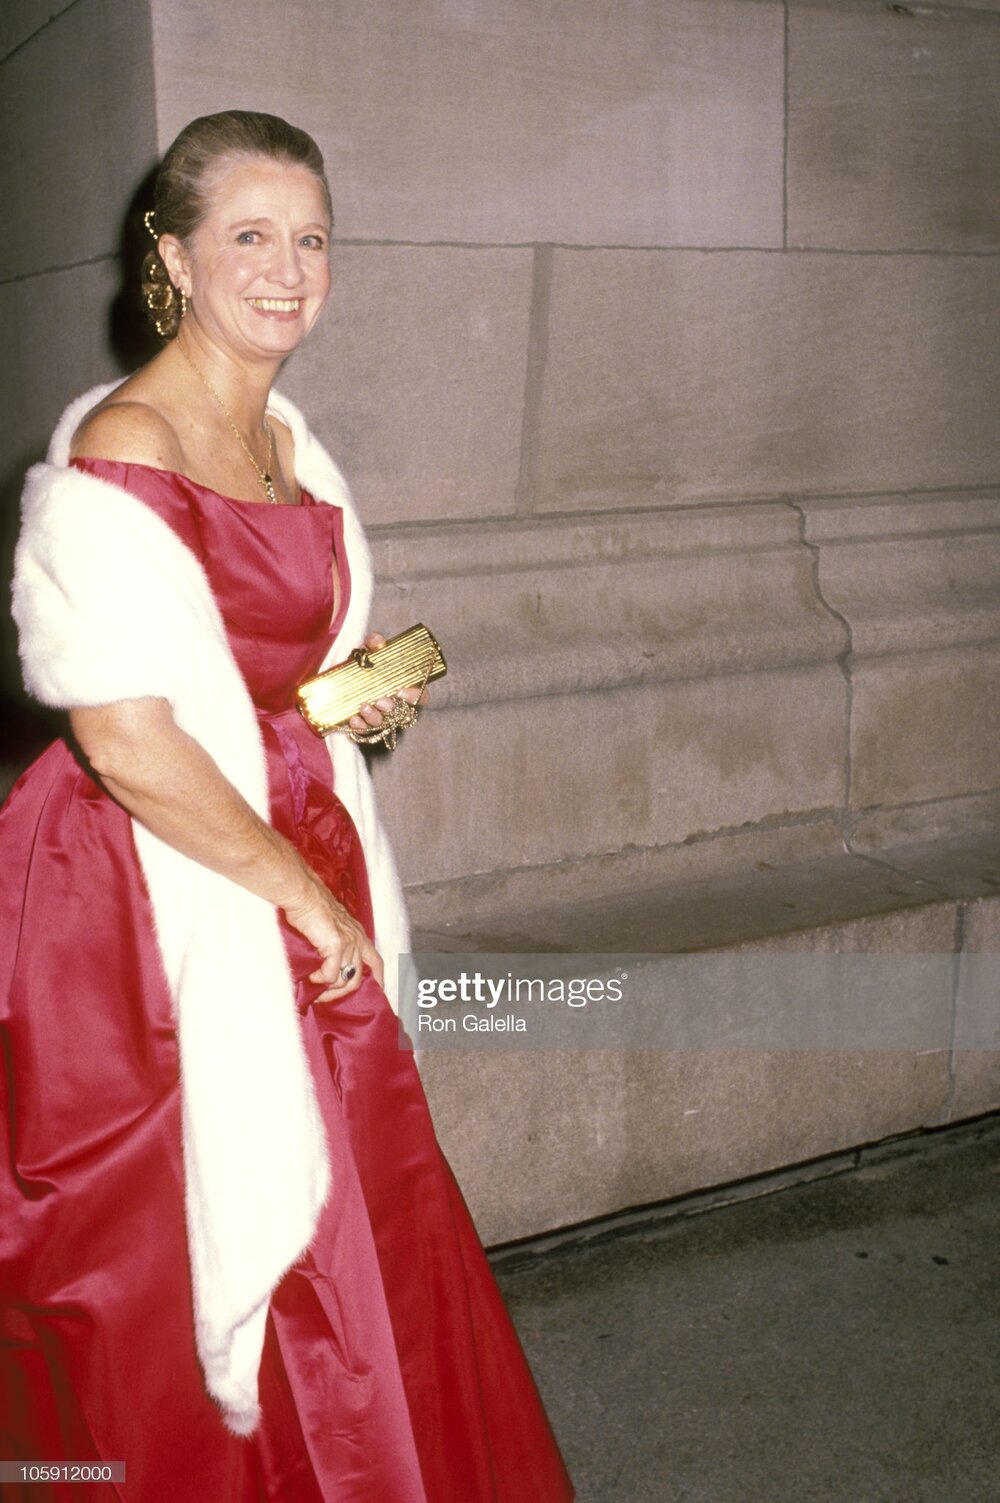 Shirley Lord during Opening of Canaletto Art Exhibit at Metropolitan Museum of Art, 1989.